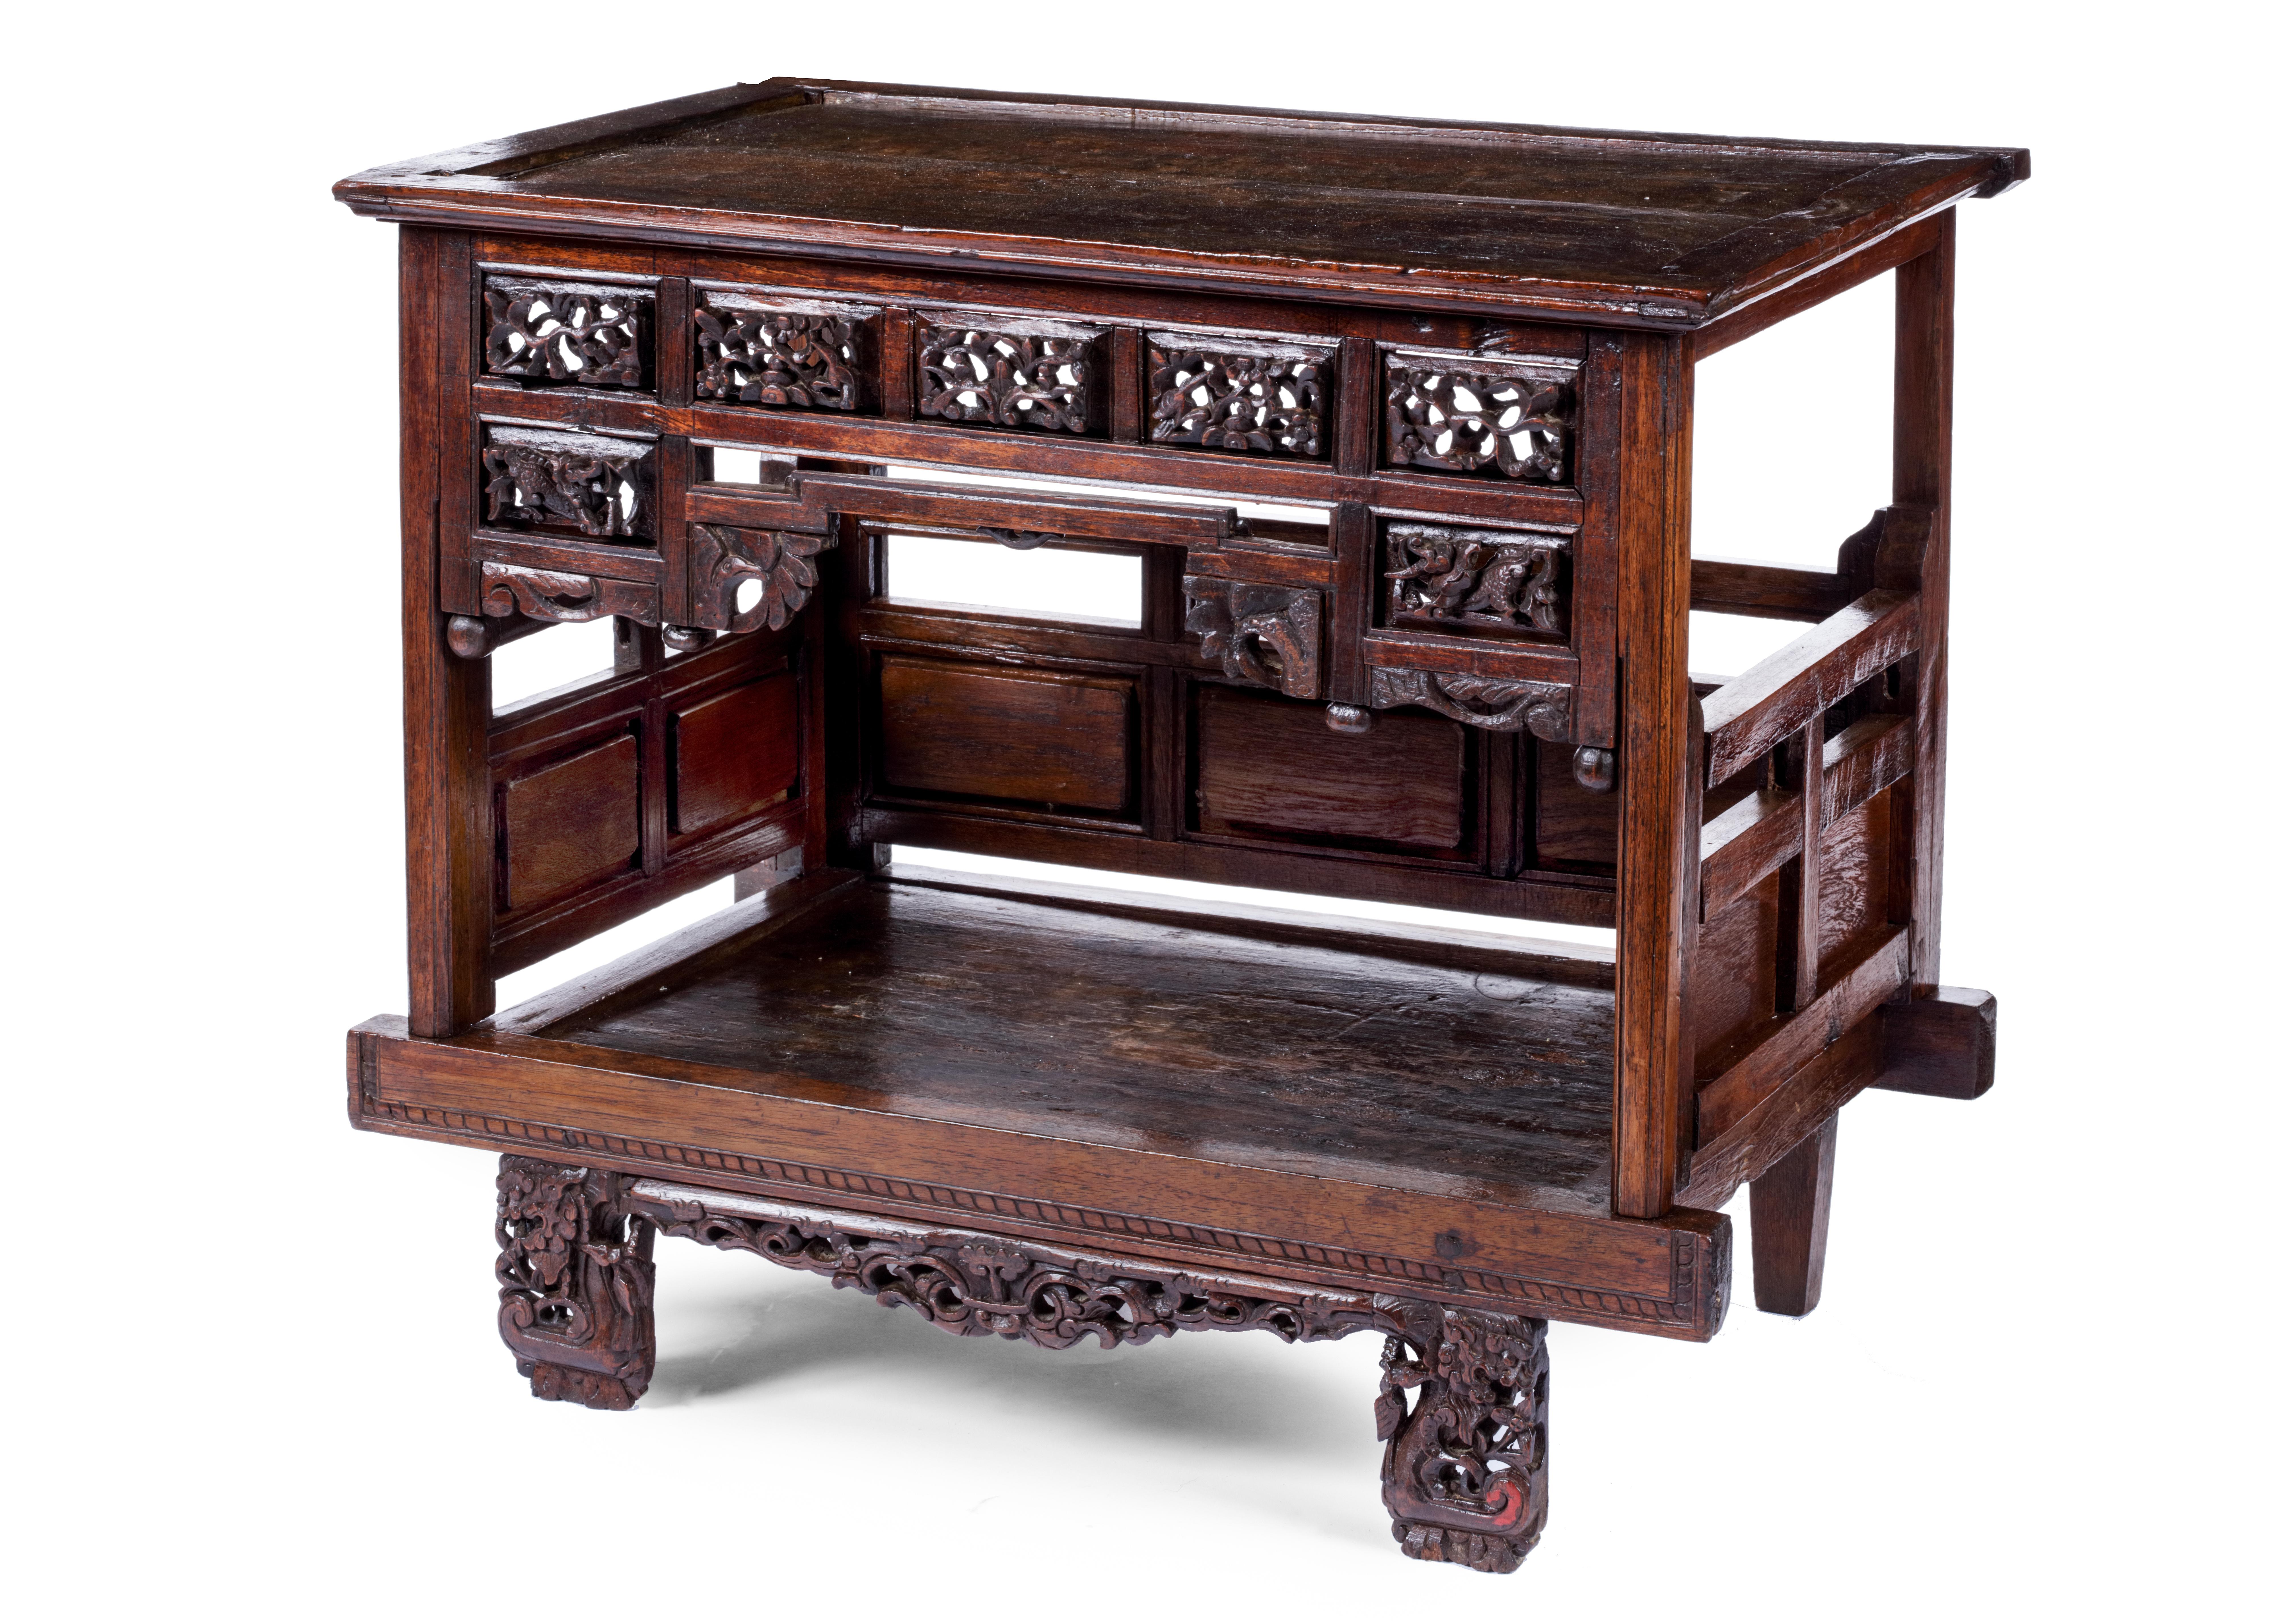 A Peranakan djati wood miniature bed for an Anak Ambar, a miscarried fetus
Indonesia, Peranakan Chinese, late 19th century


Measures: H. 41 x L. 48 x D. 32 cm.


In the past Peranakan Chinese tended to believe that a fetus that did not grow